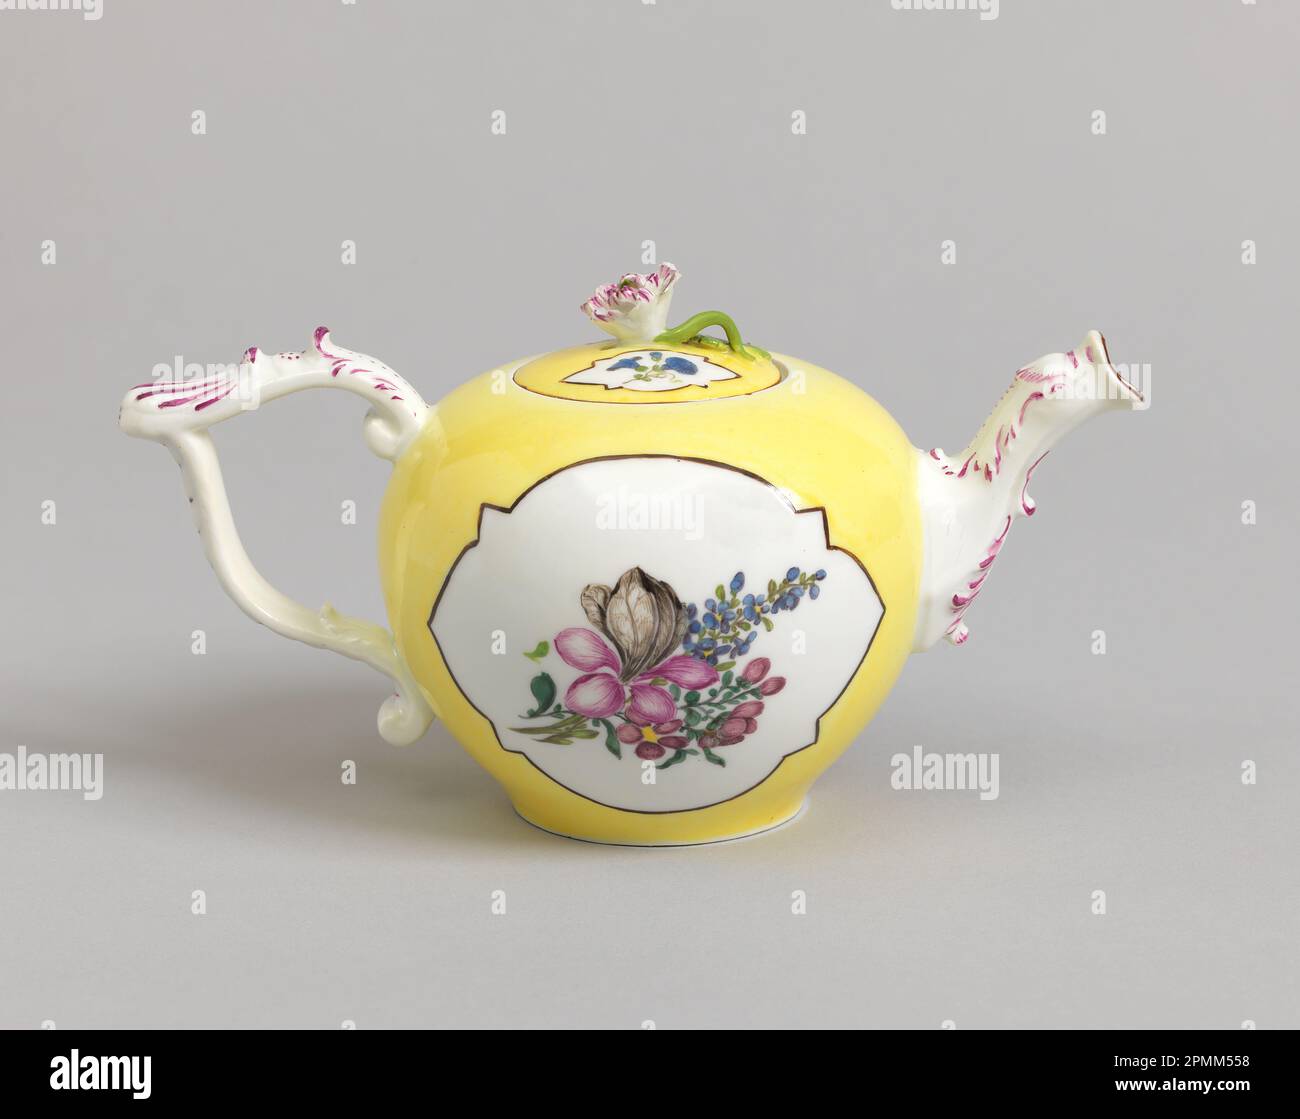 Teapot Teapot; Manufactured by Meissen Porcelain Factory (Germany), Meissen Porcelain Manufactory (Germany); Germany; hard paste porcelain, vitreous enamel Stock Photo